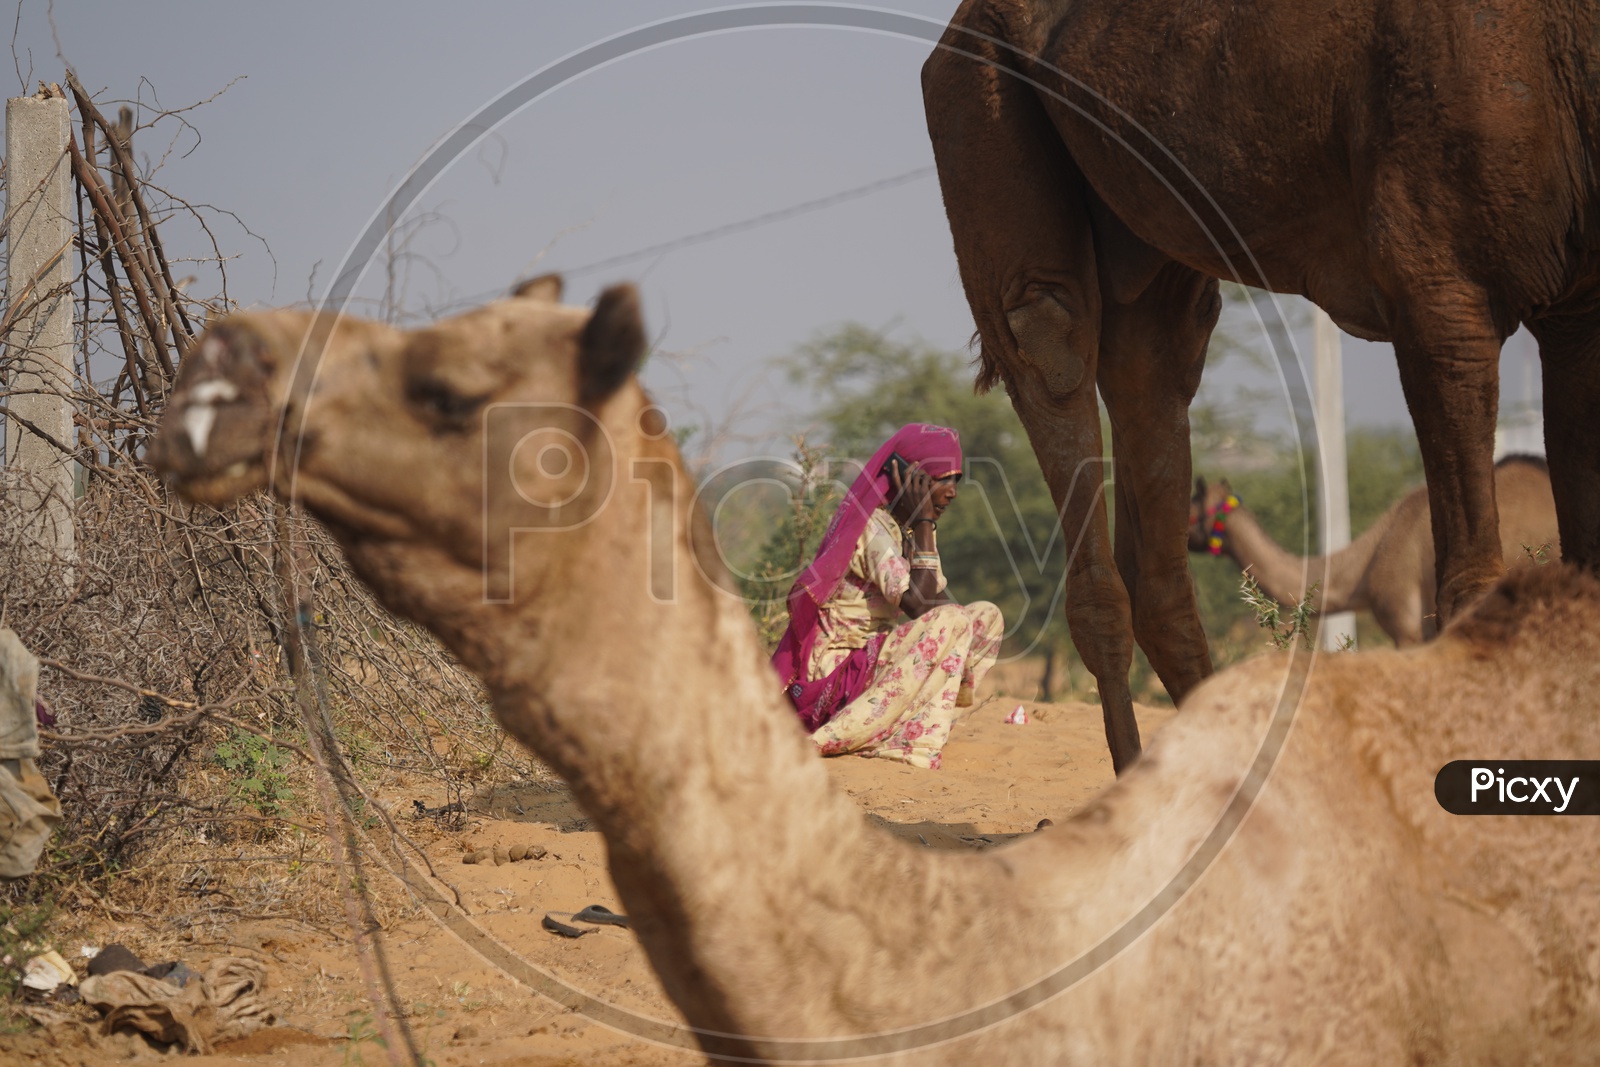 A Woman Speaking in Phone Spotted in Pushkar Camel Fair